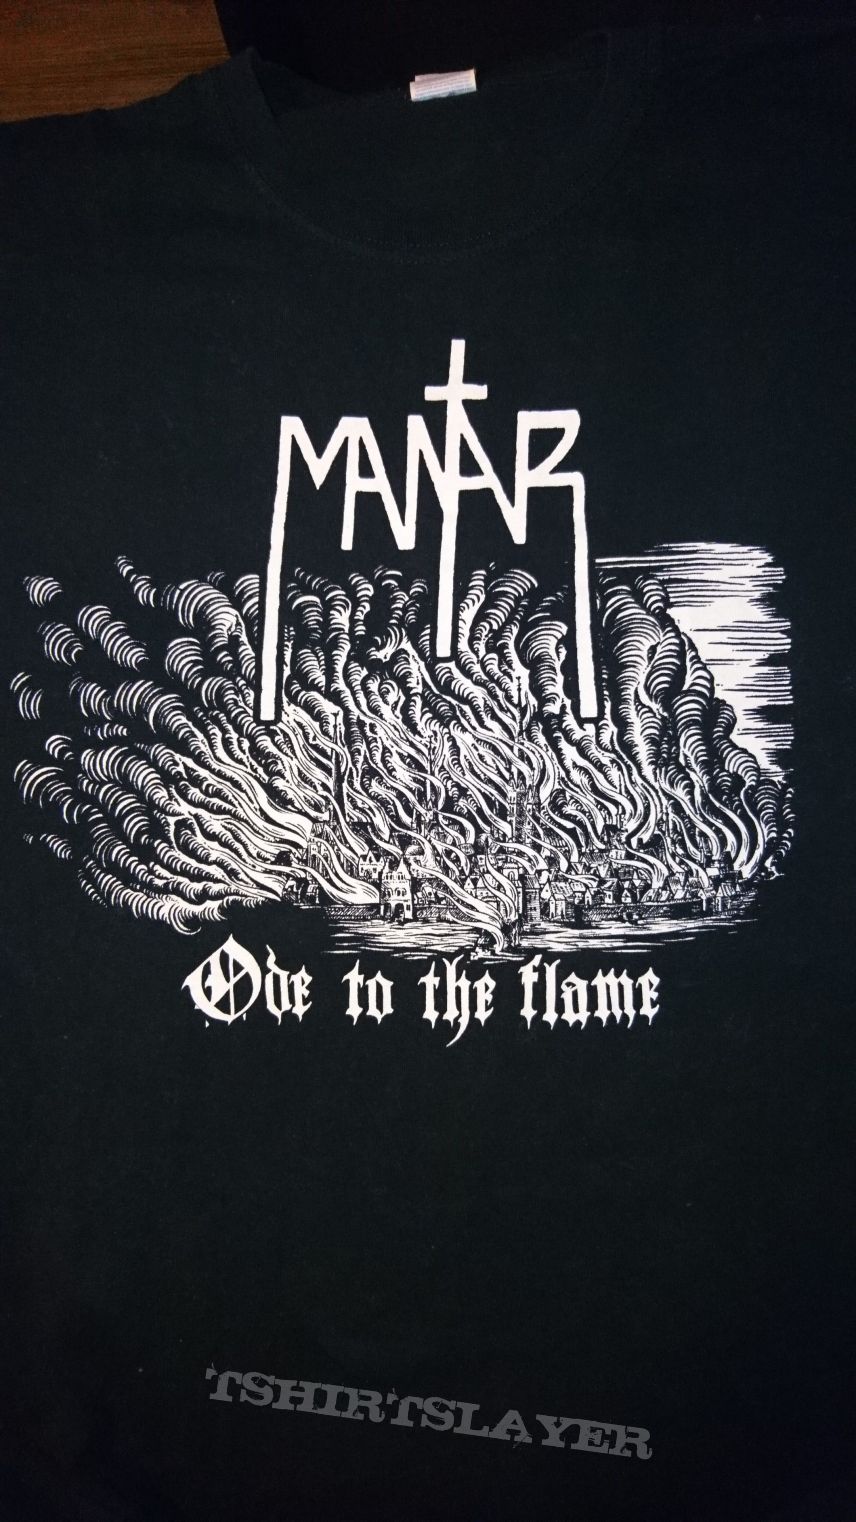 Mantar - Ode to the Flame 